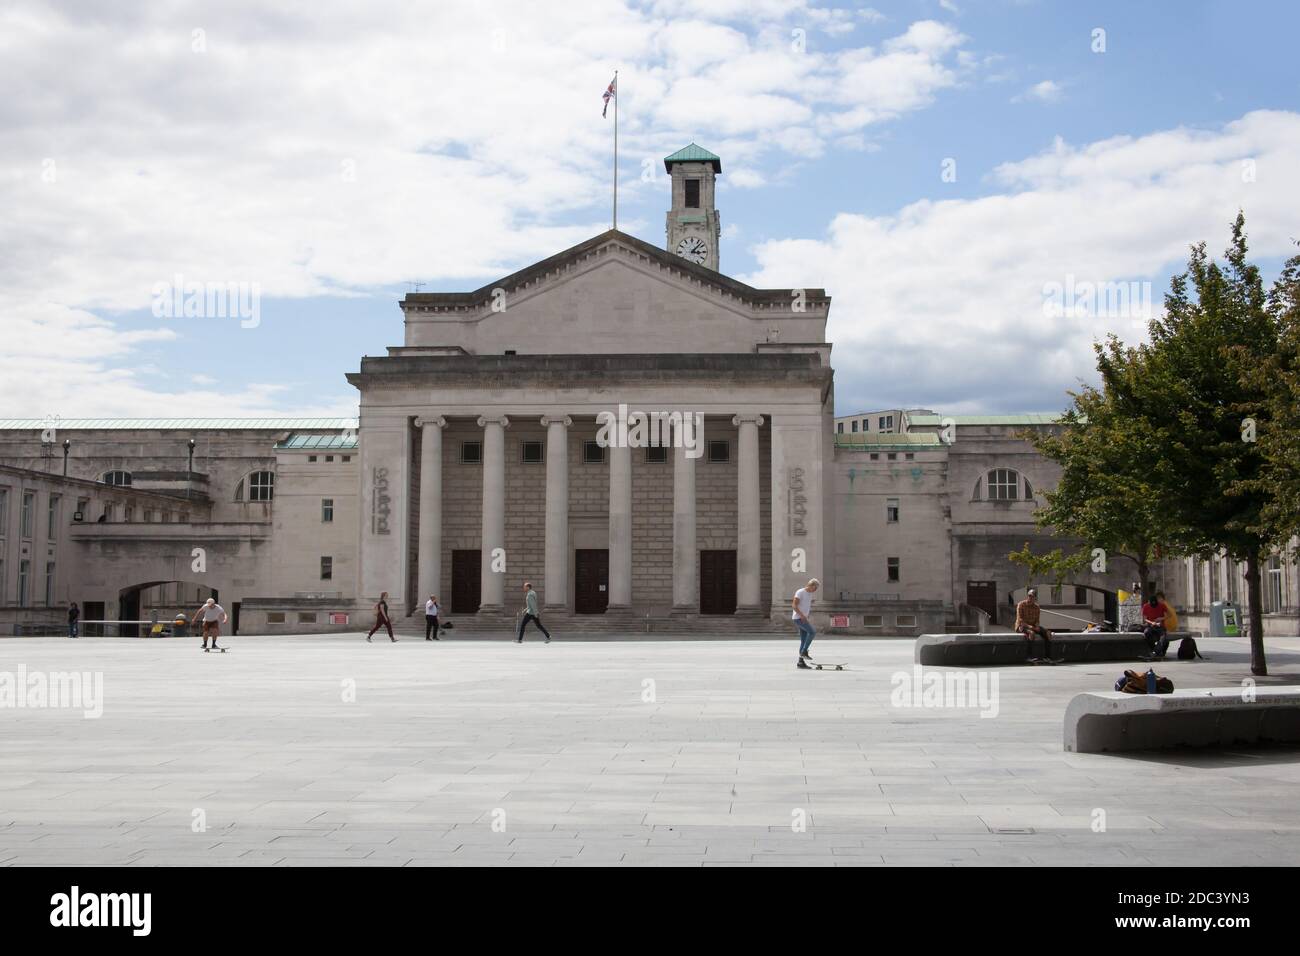 The O2 Guildhall in Southampton, Hampshire in the UK, taken on the 10th July 2020 Stock Photo